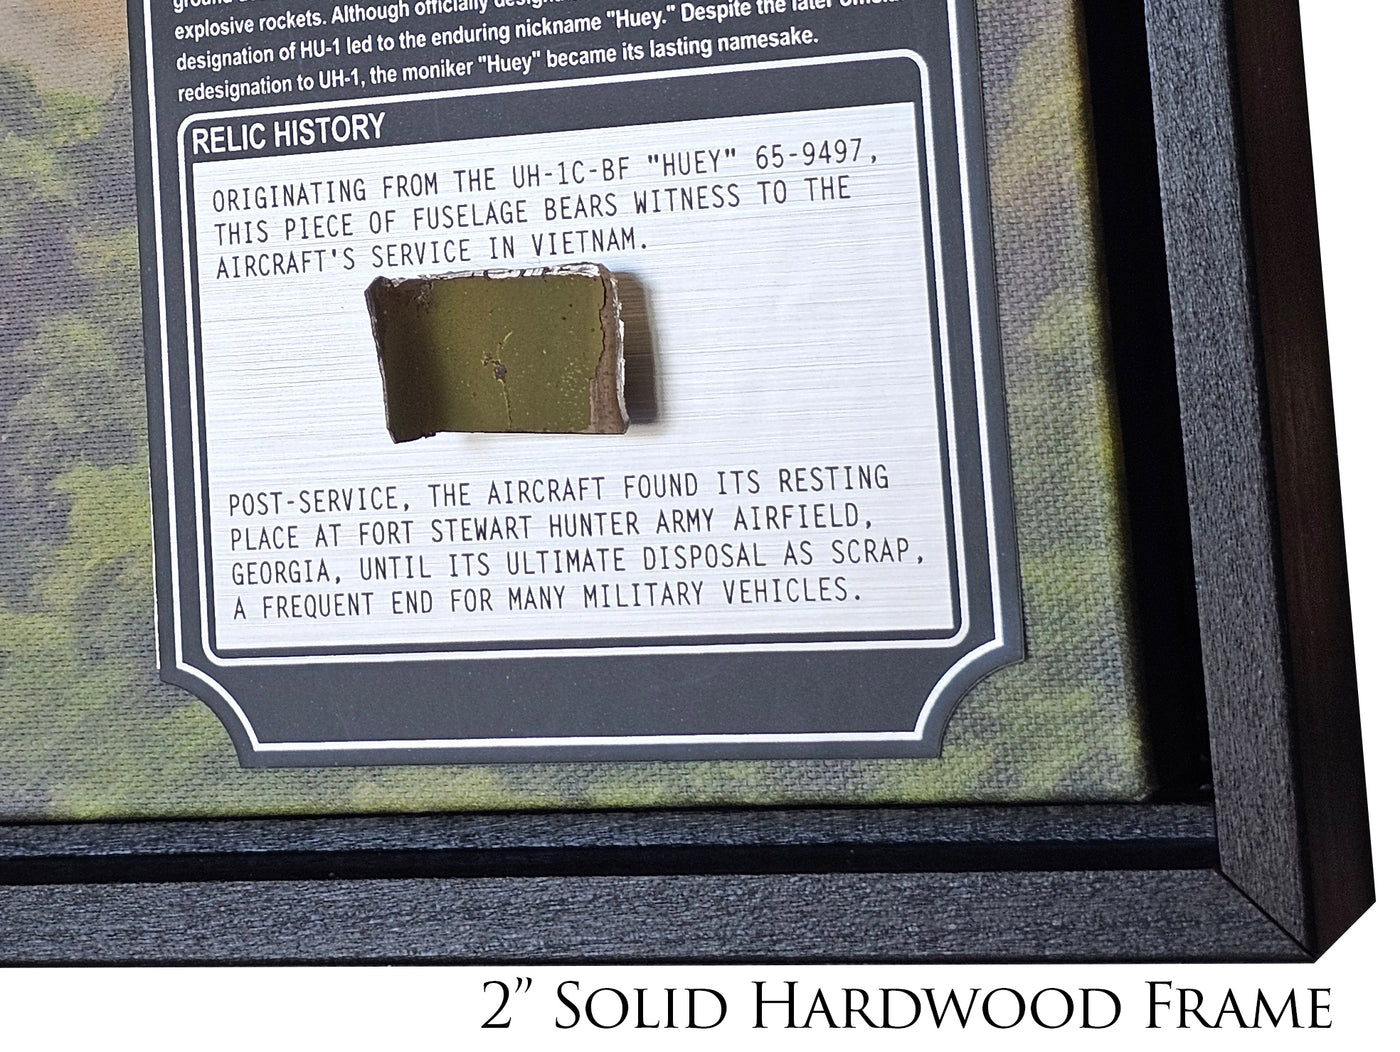 Detail shot of the 'Stacked Deck' UH-1C Huey helicopter art, focusing on the relic.